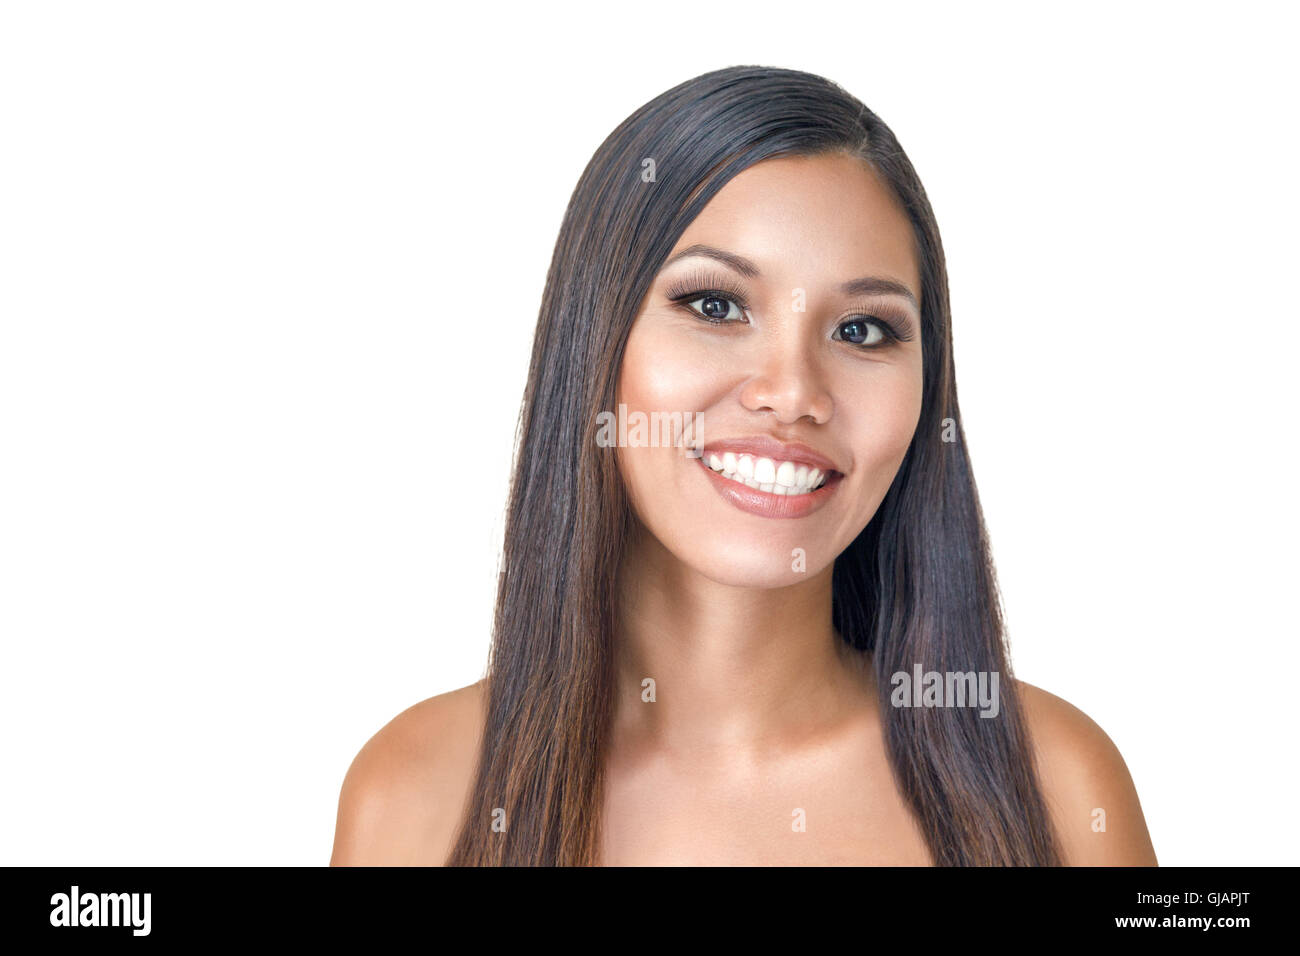 Beautiful young asian woman portrait isolated on white background Stock Photo